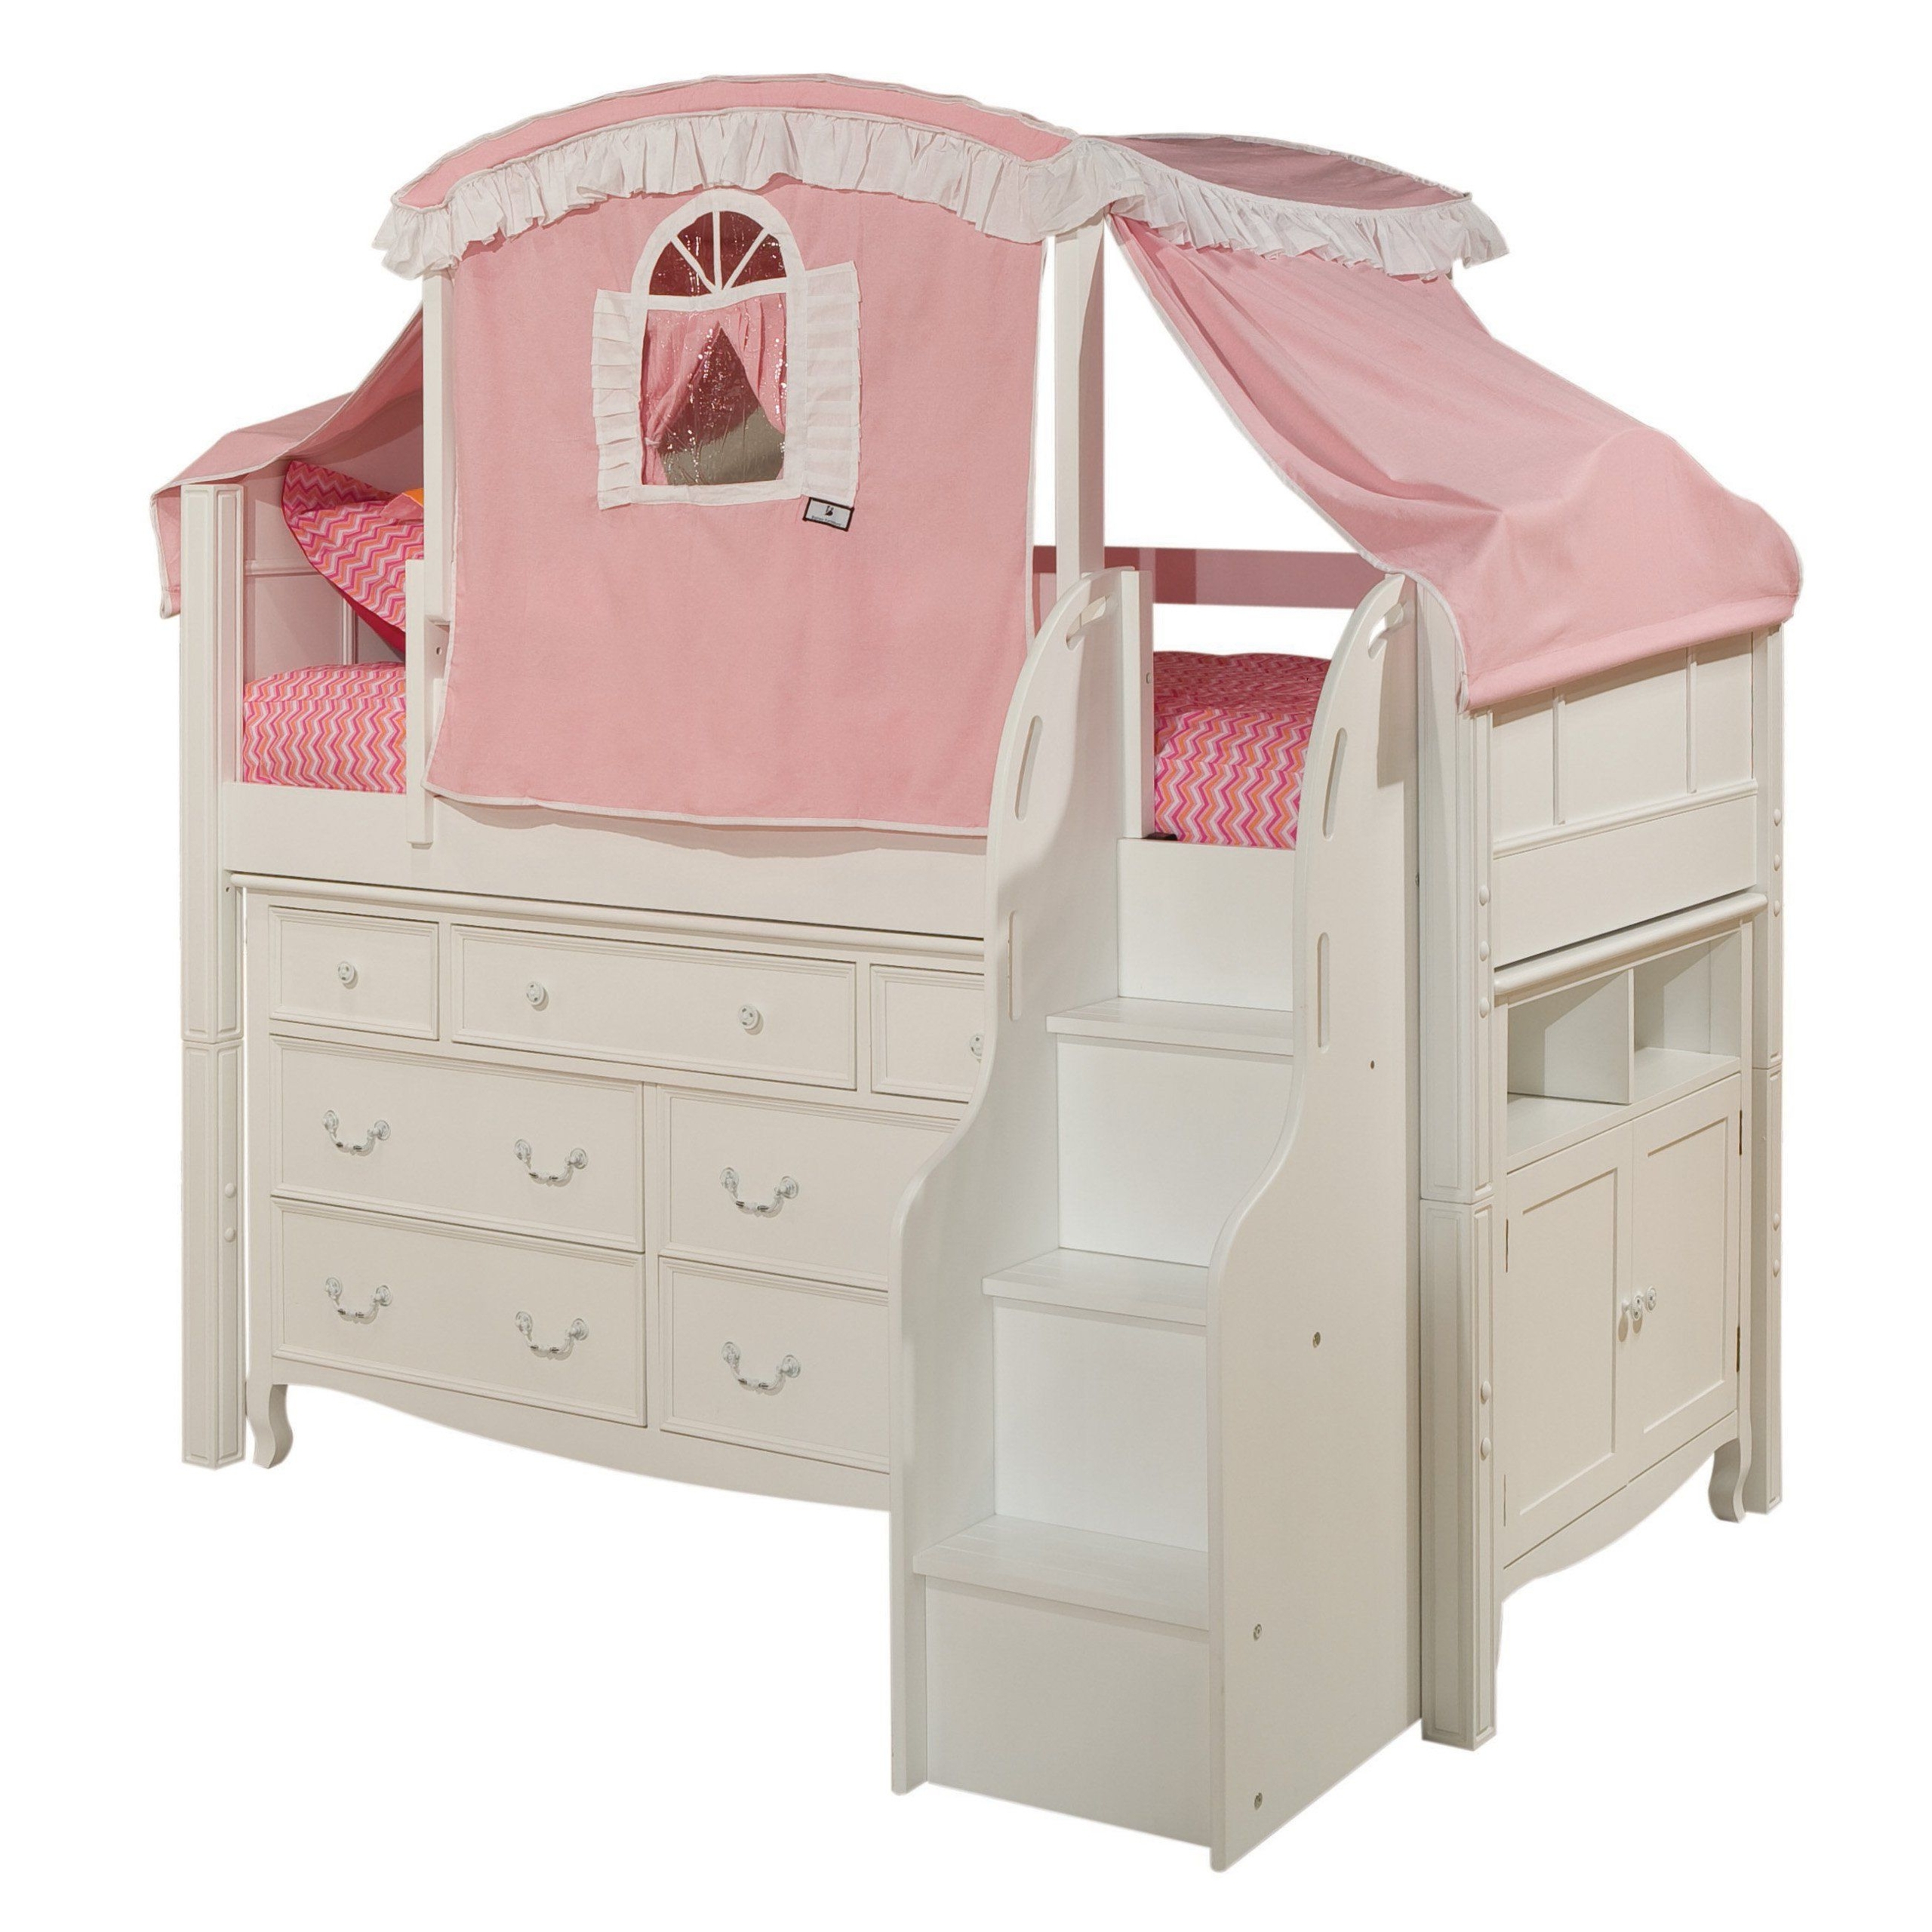 Emma twin loft with storage options bunk beds furniture for